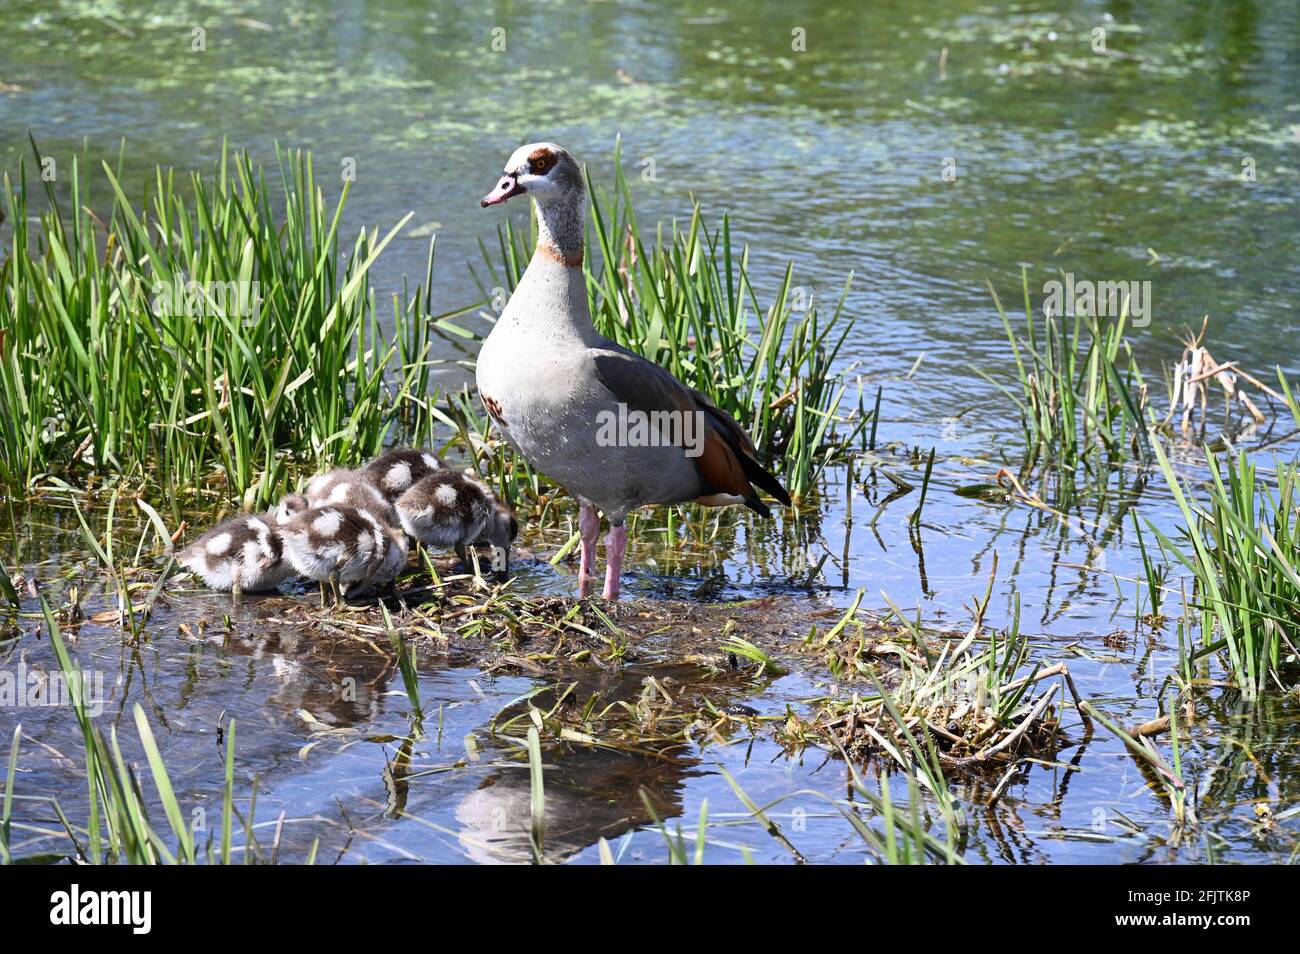 Kent, UK. Sunny intervals with a moderate breeze. Temperatures rising to 11 degrees. A mother Egyptian Goose (Alopochen aegyptiaca) watches over her goslings. River Cray, Foots Cray Meadows, Sidcup. Stock Photo